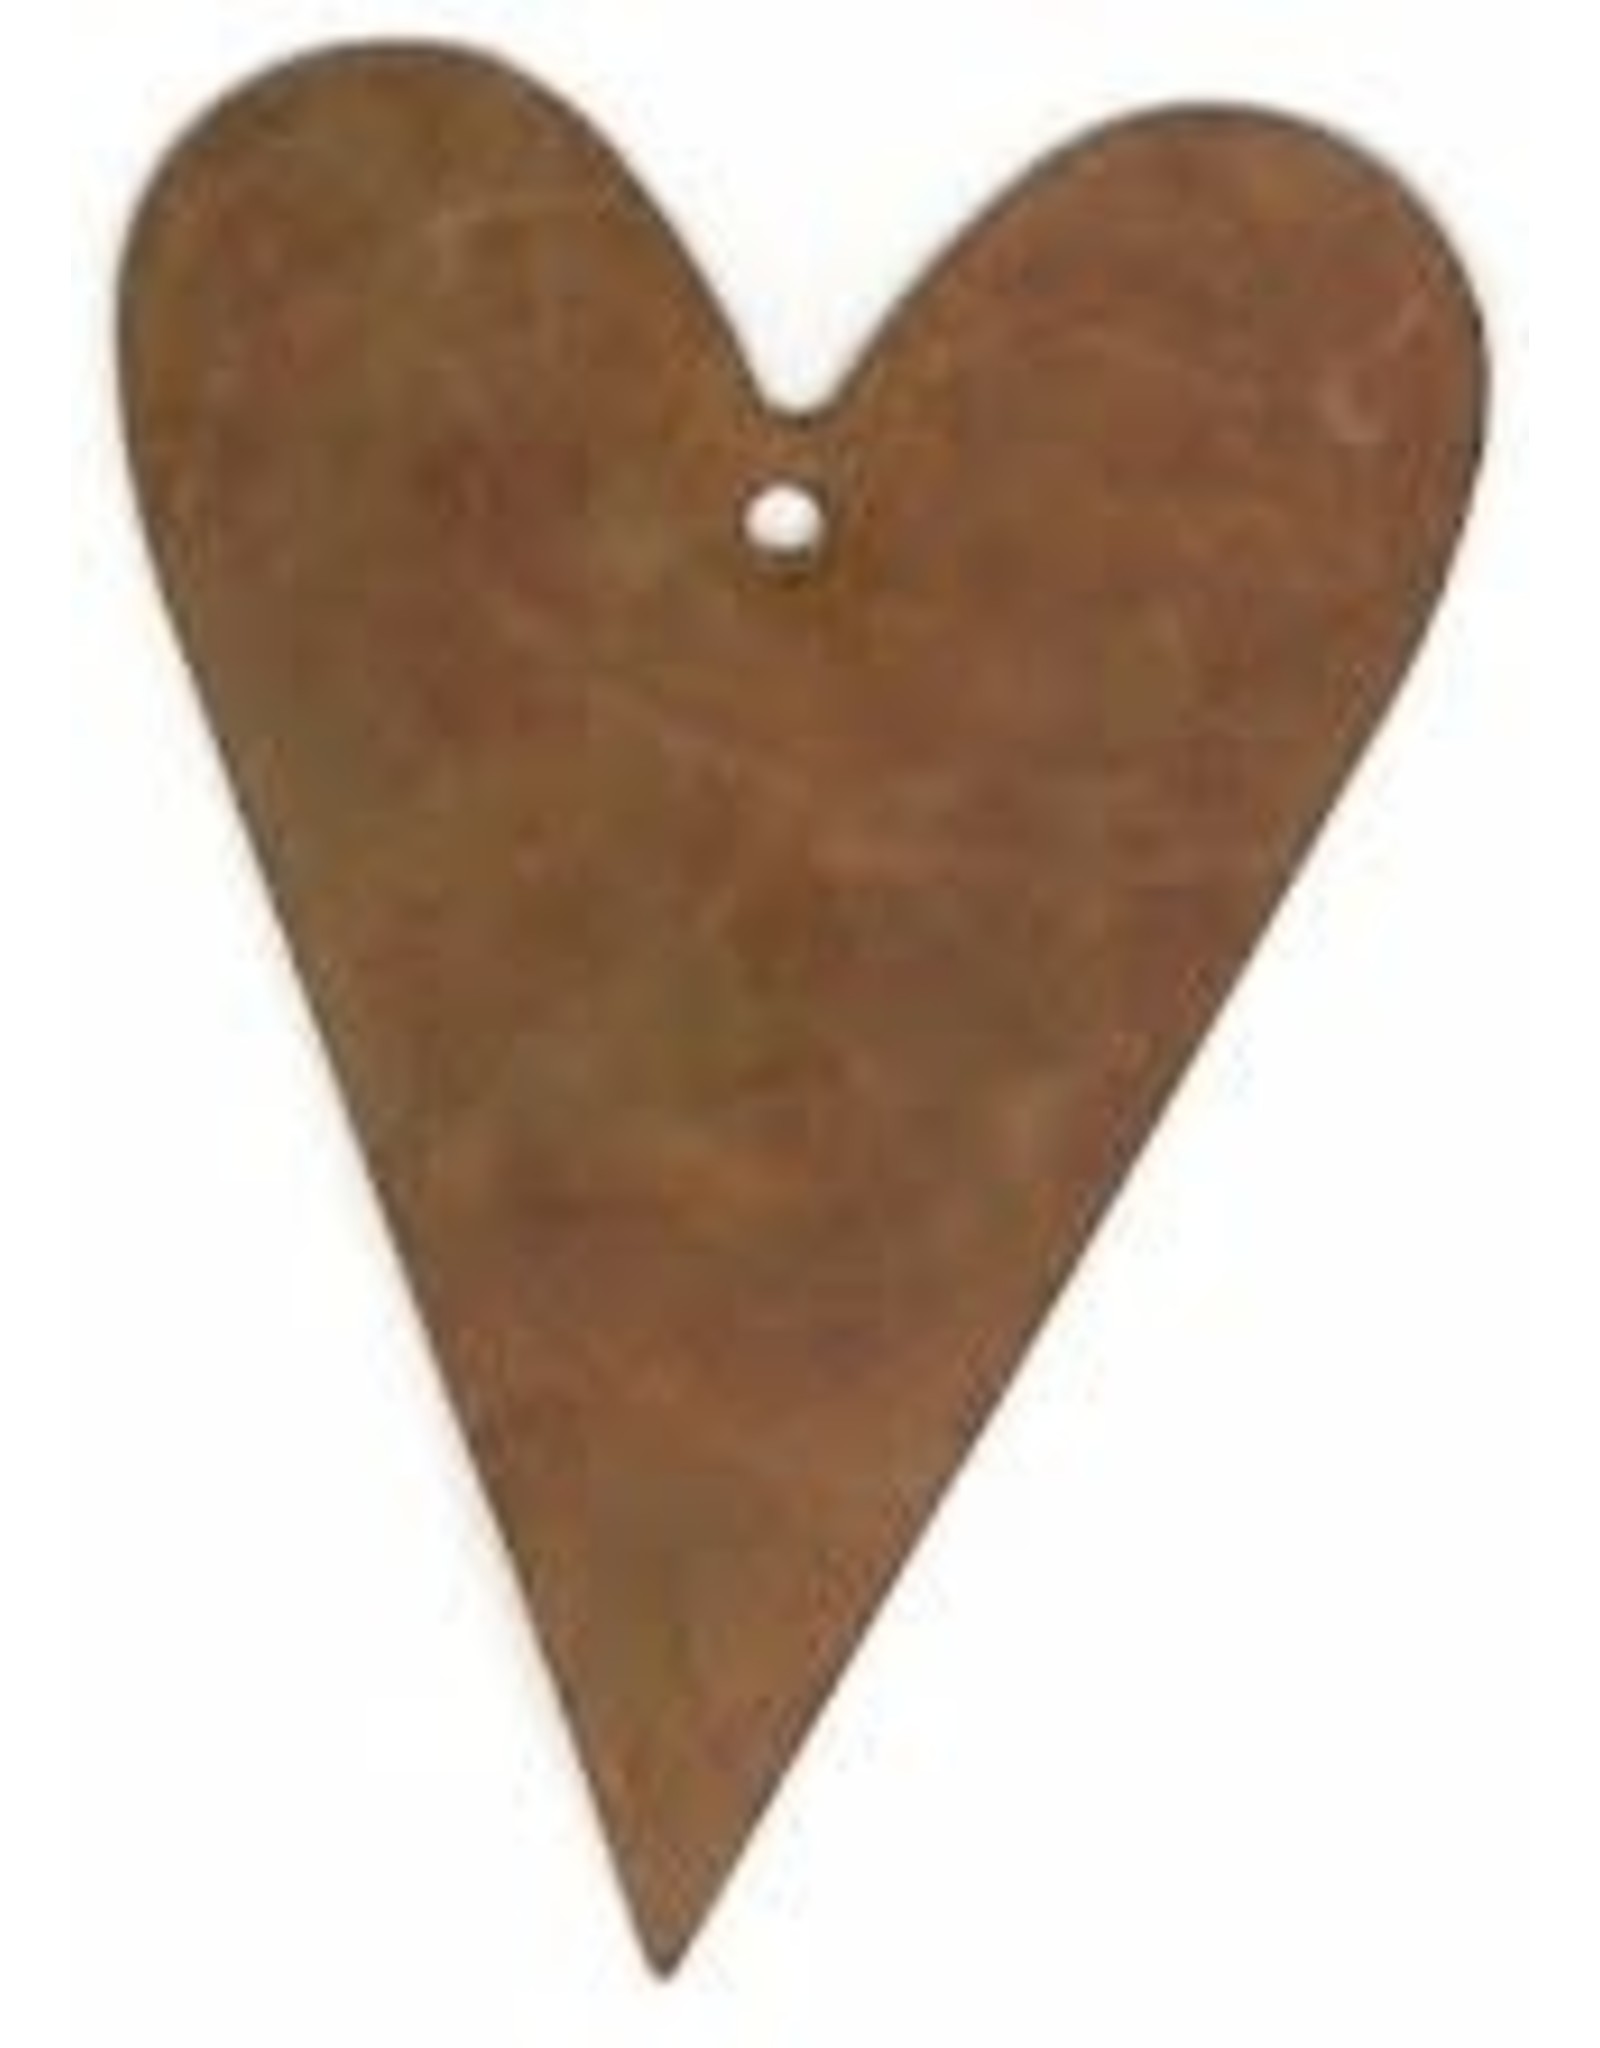 RUSTY TIN HEART 2 1/4" (WITH HOLE) PACKAGED 12